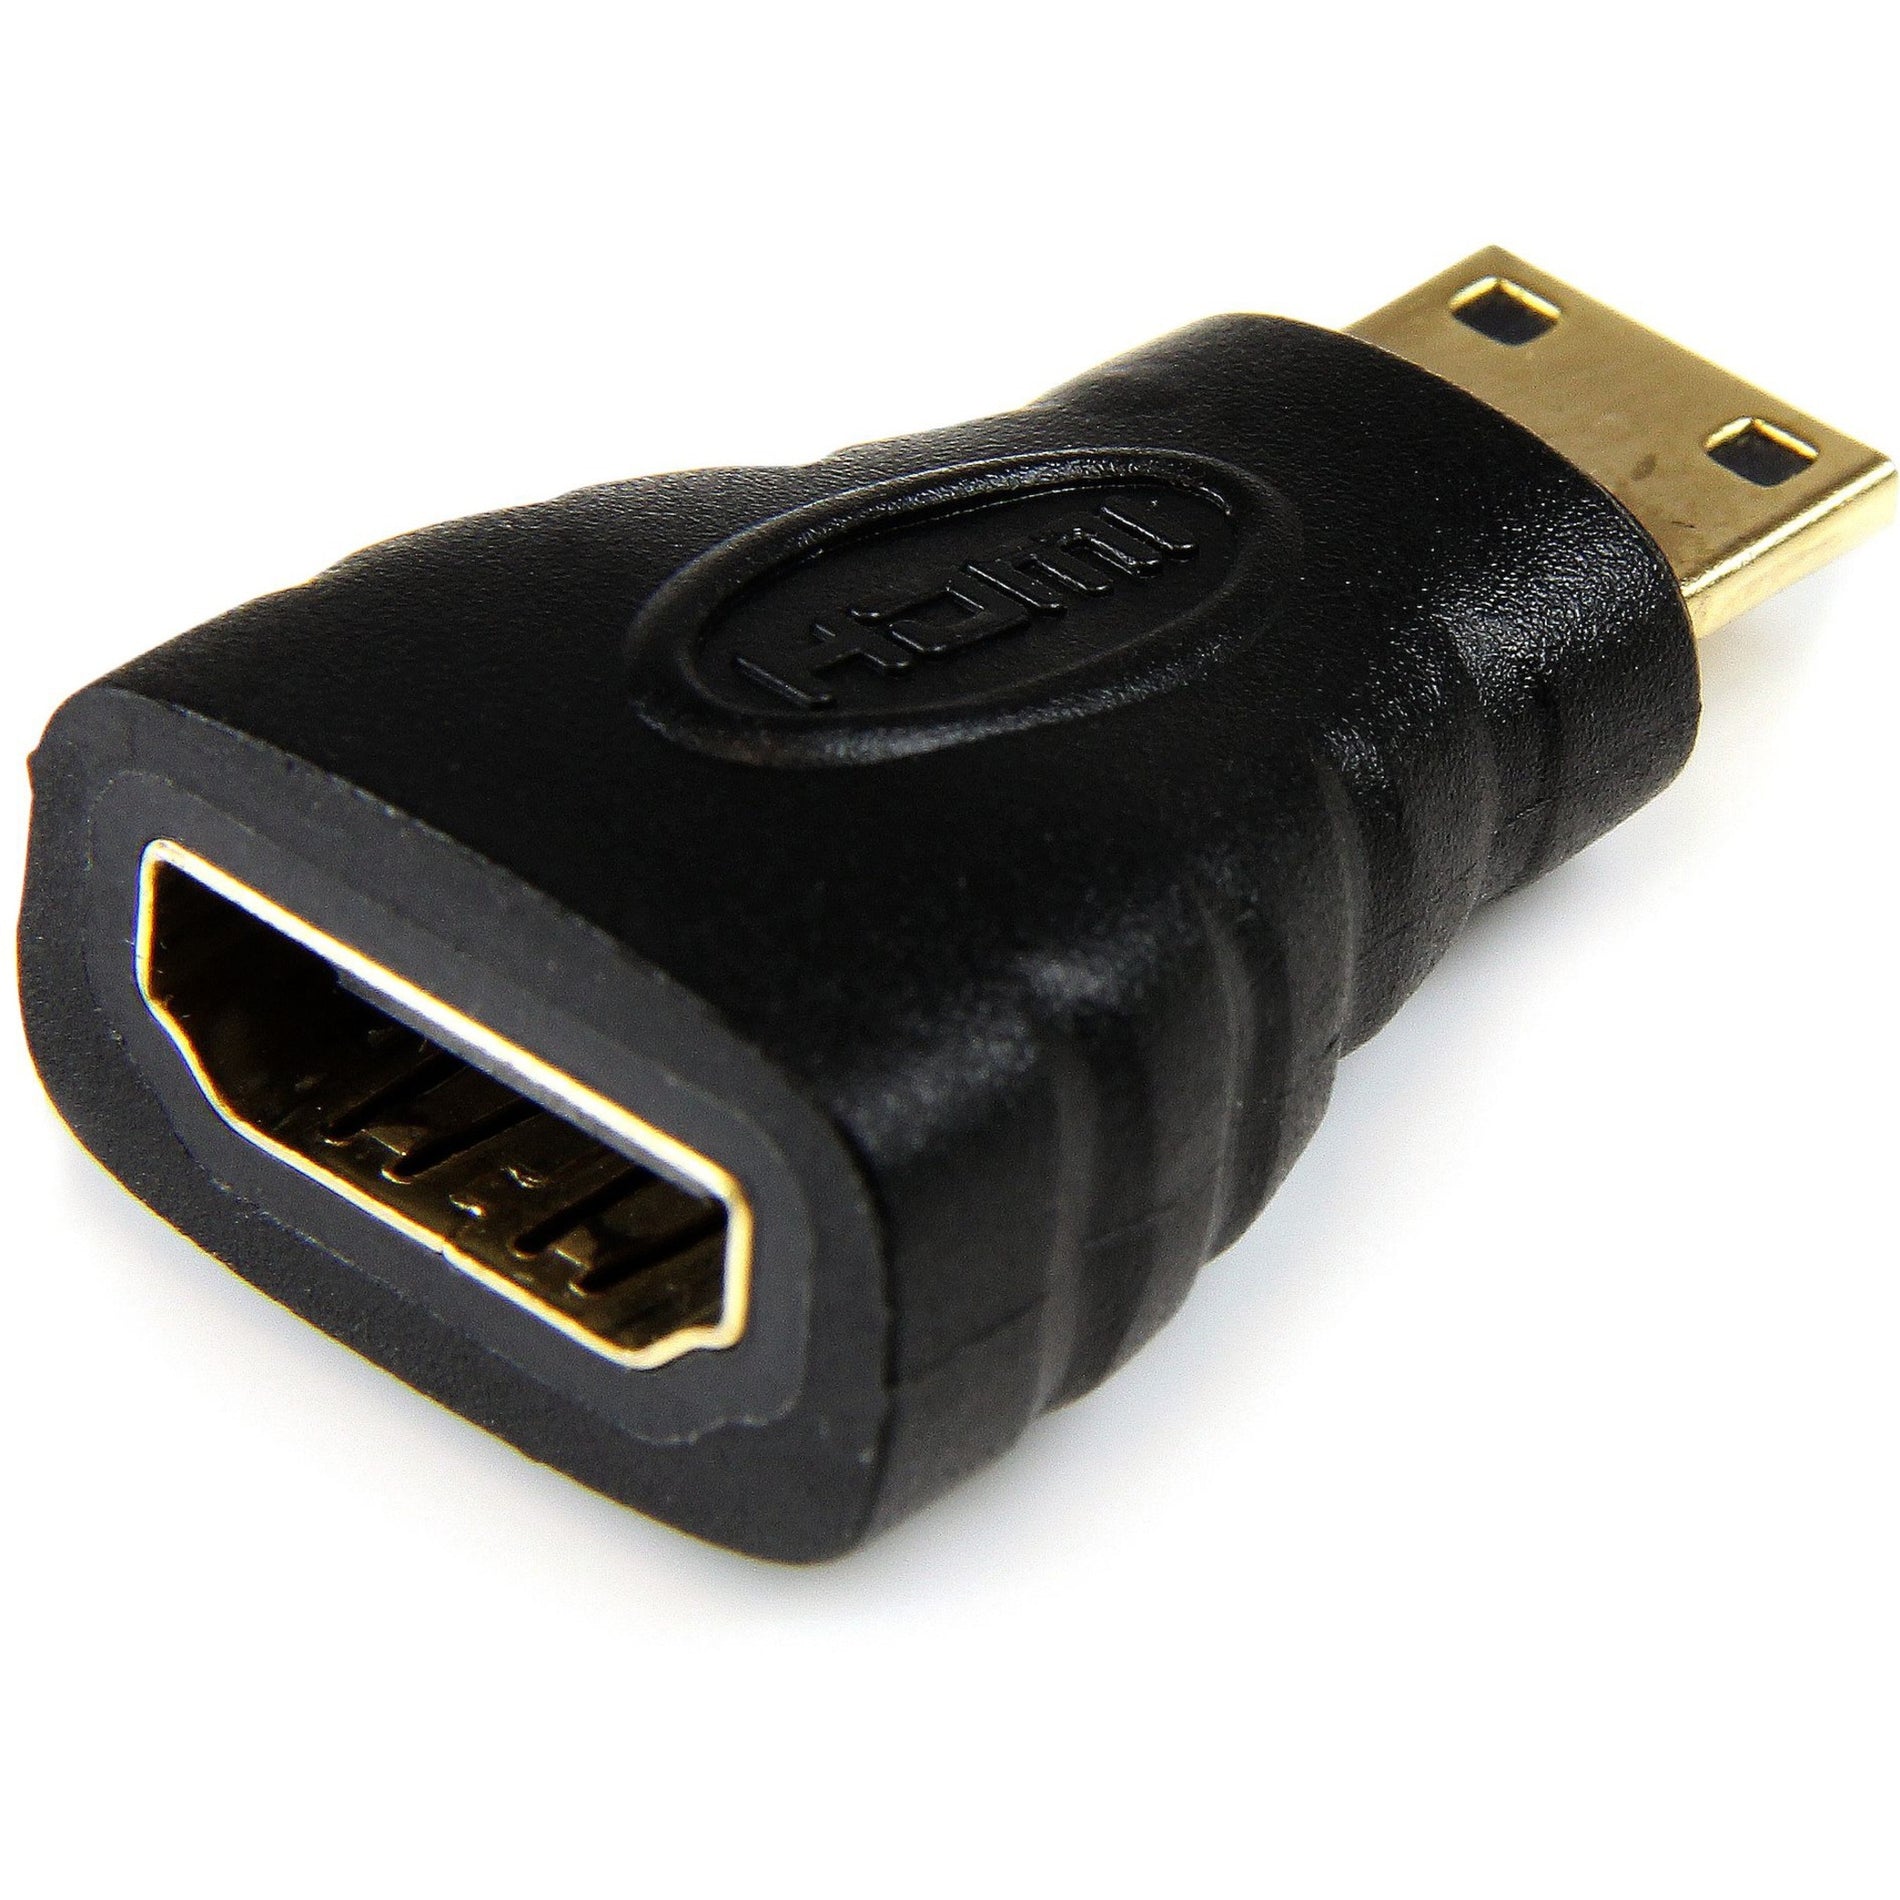 StarTech.com HDACFM HDMI to HDMI Mini Adapter - F/M, Gold Plated, 4K Resolution Support